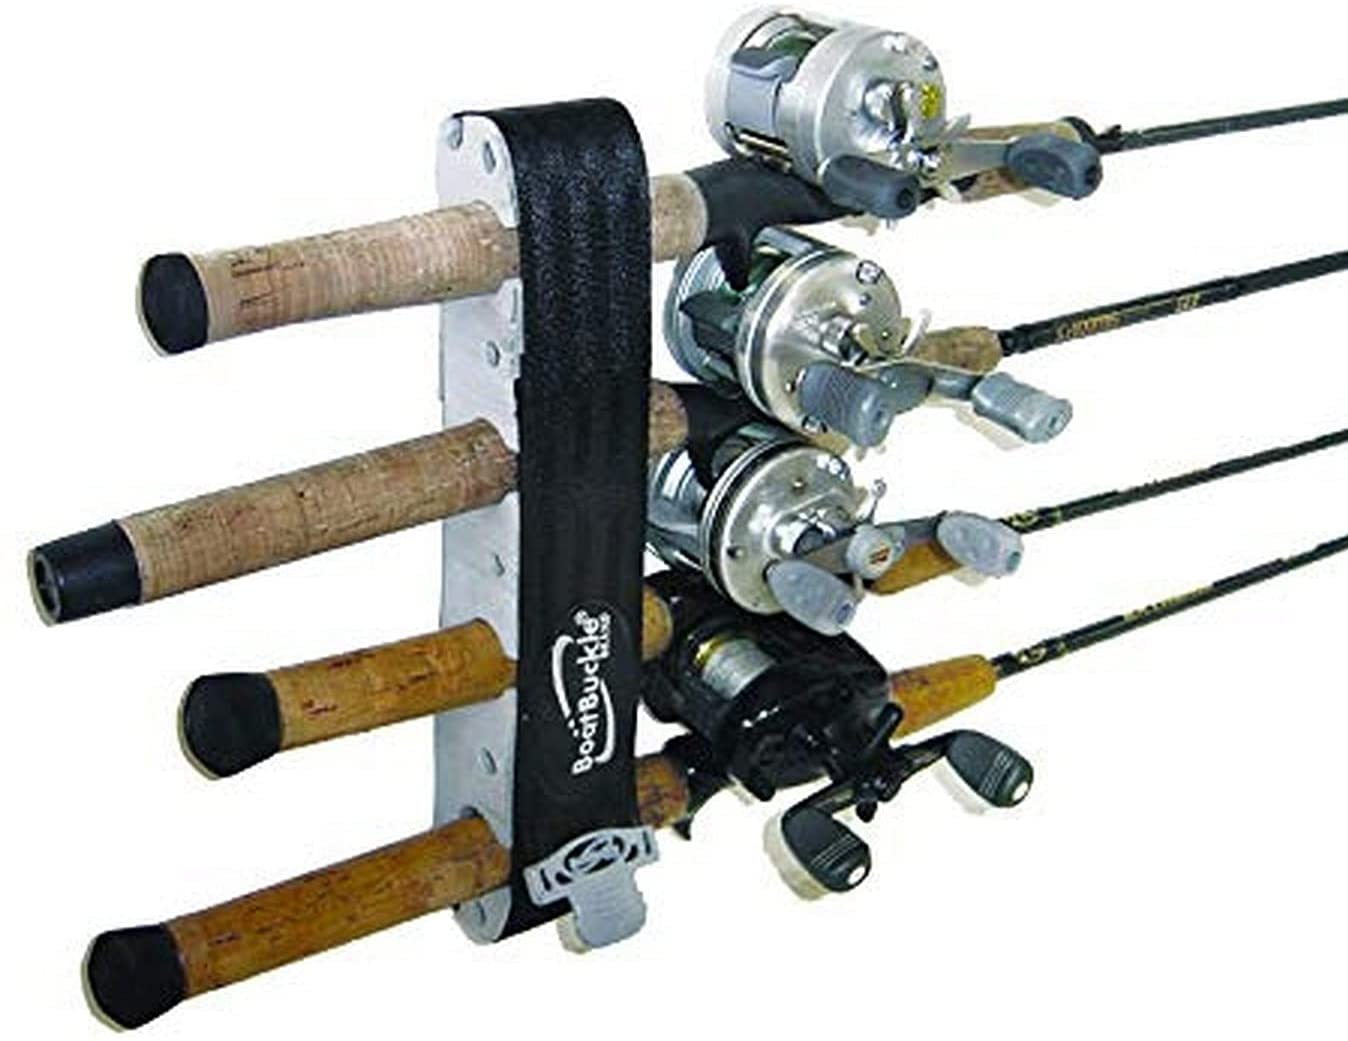 Top of Hardtop Rod Storage - Thoughts? - The Hull Truth - Boating and  Fishing Forum